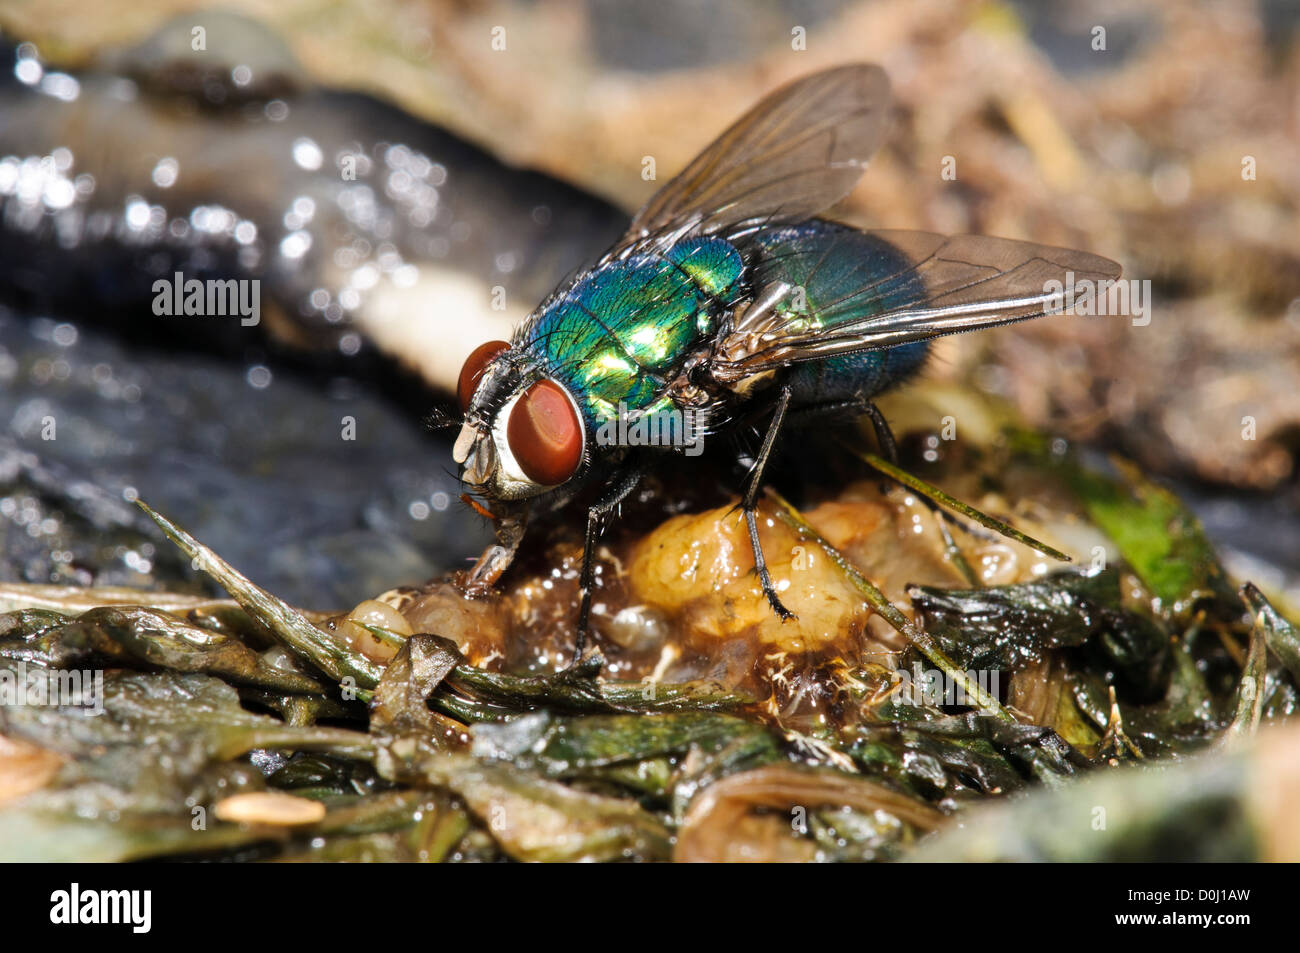 A greenbottle (Lucilia caesar) feeding on the remains of a slug that was trodden on by a visitor at Wicken Fen, Cambridgeshire. Stock Photo